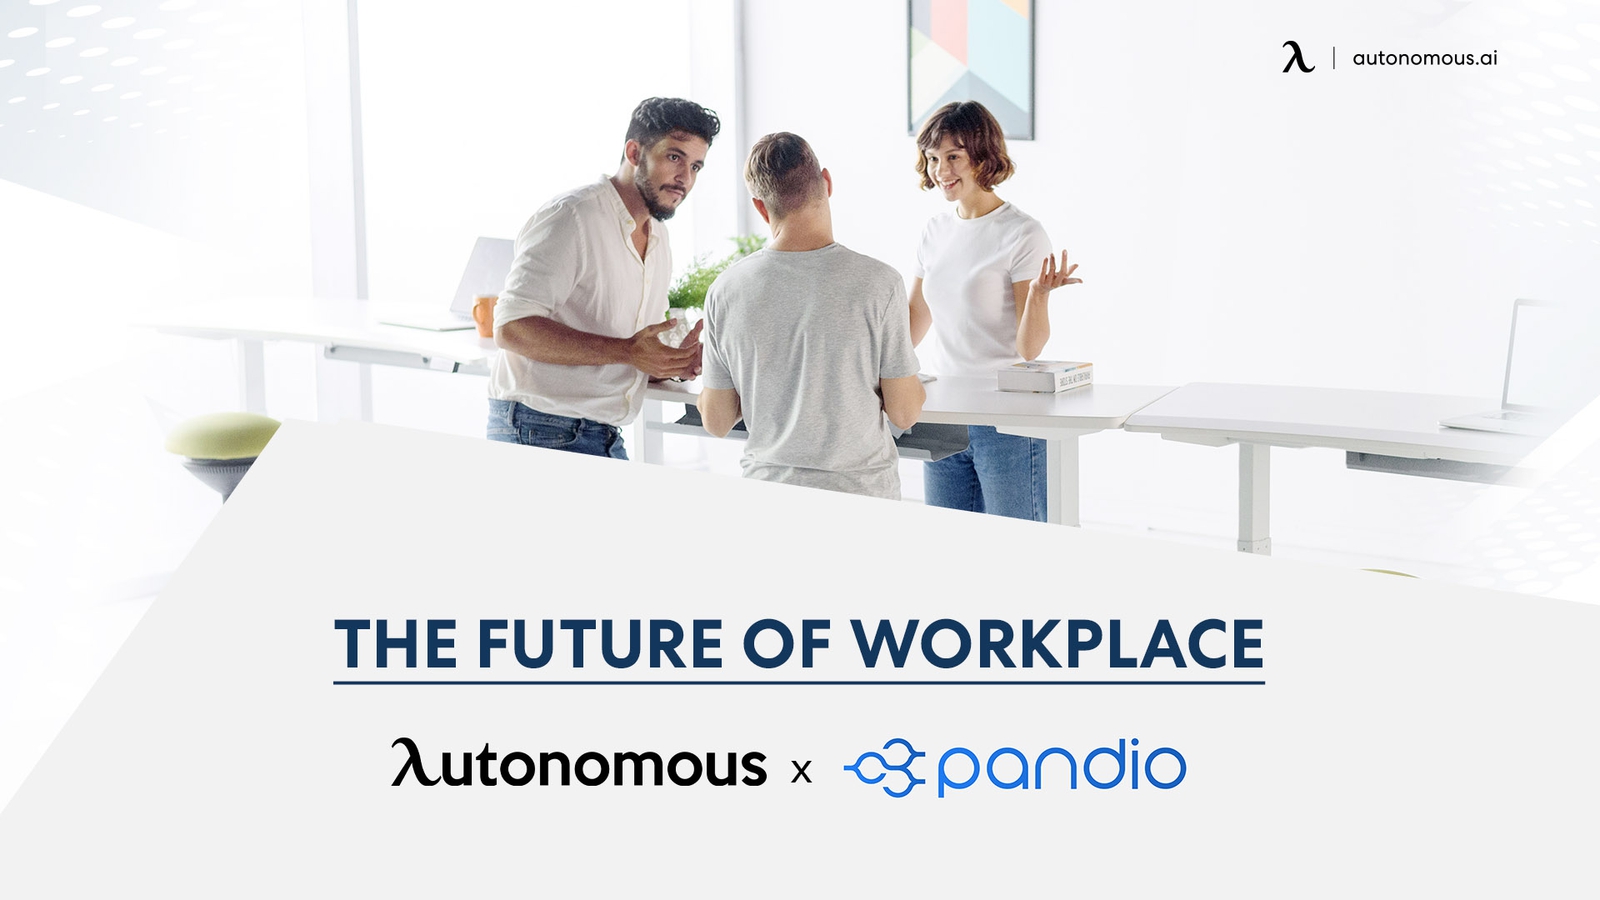 Autonomous Fireside Chats: Pandio, Data Management, and the Future of Work